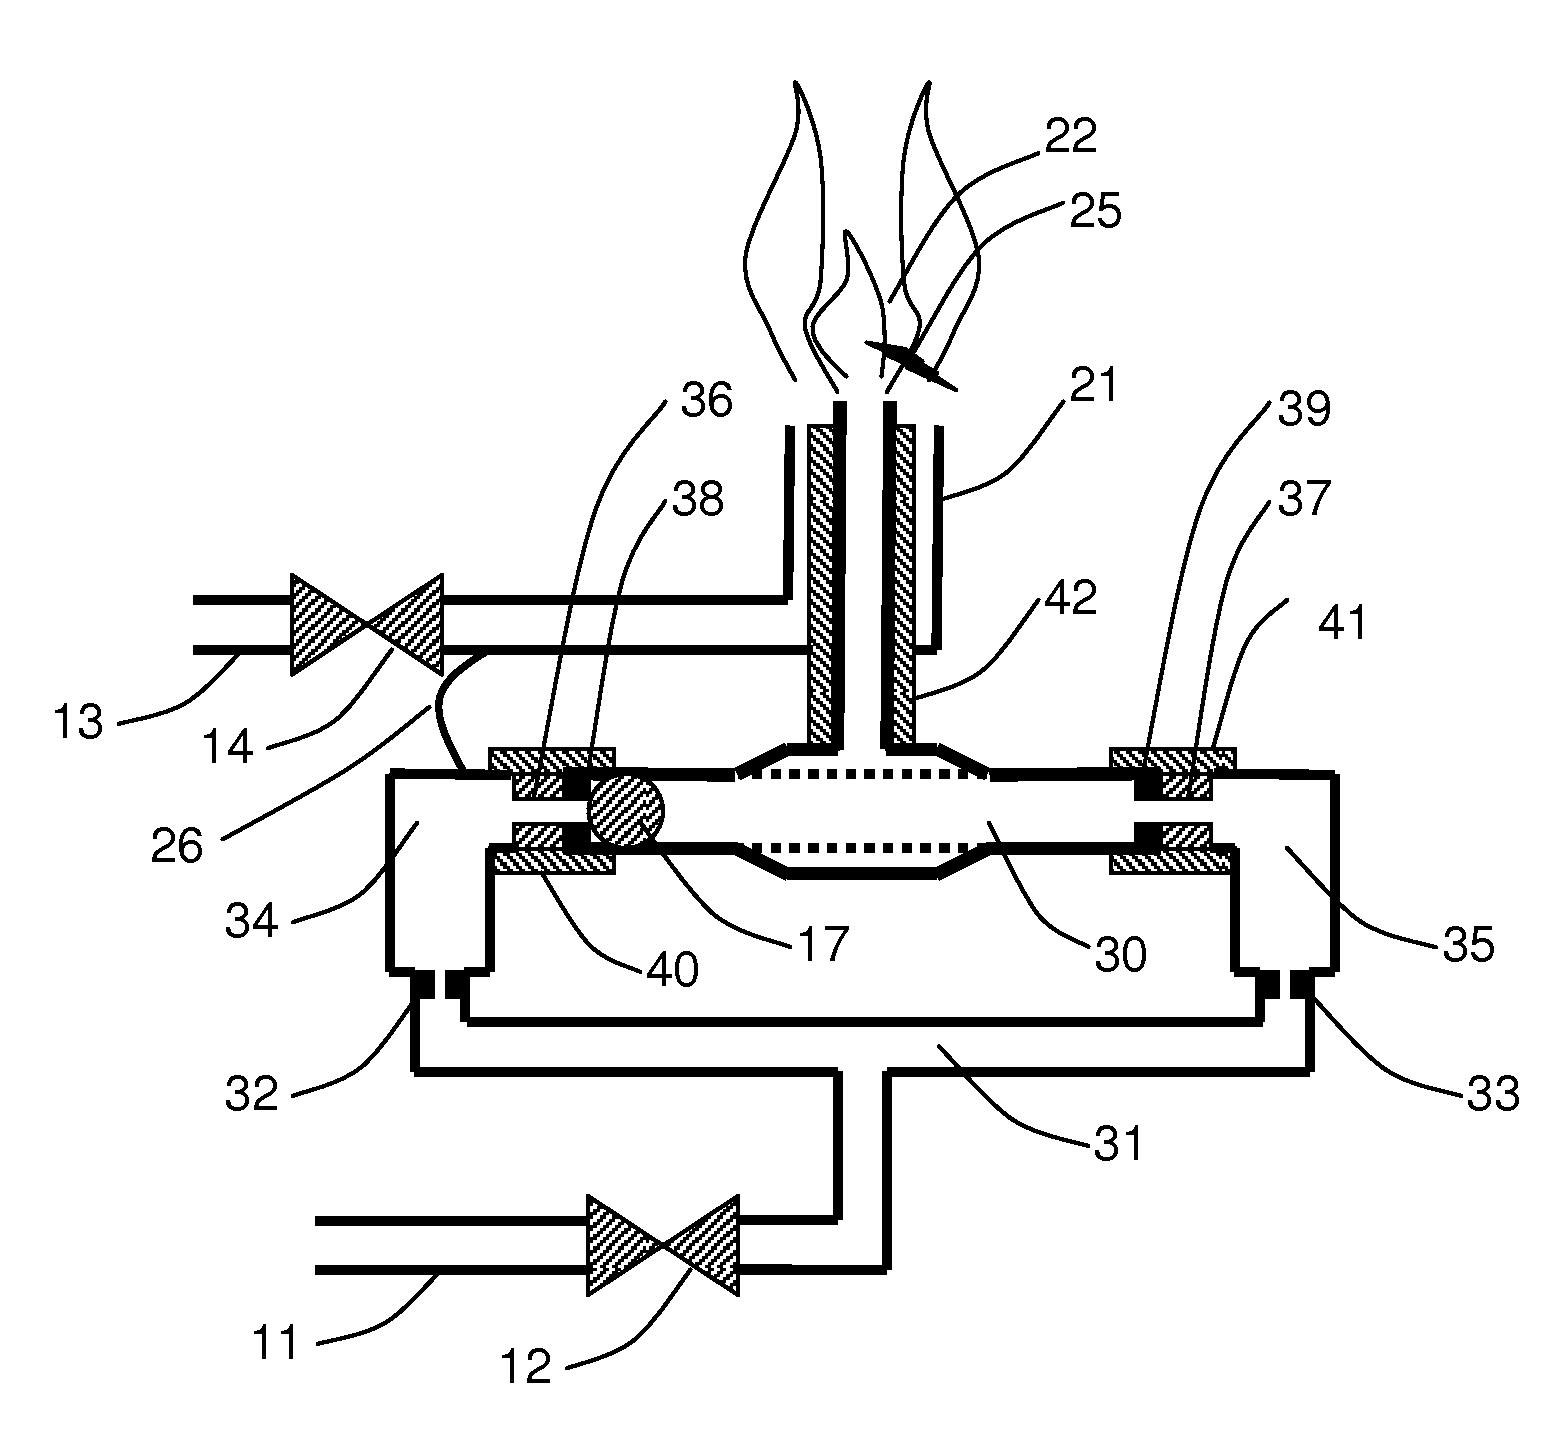 Propellant flow actuated piezoelectric igniter for combustion engines